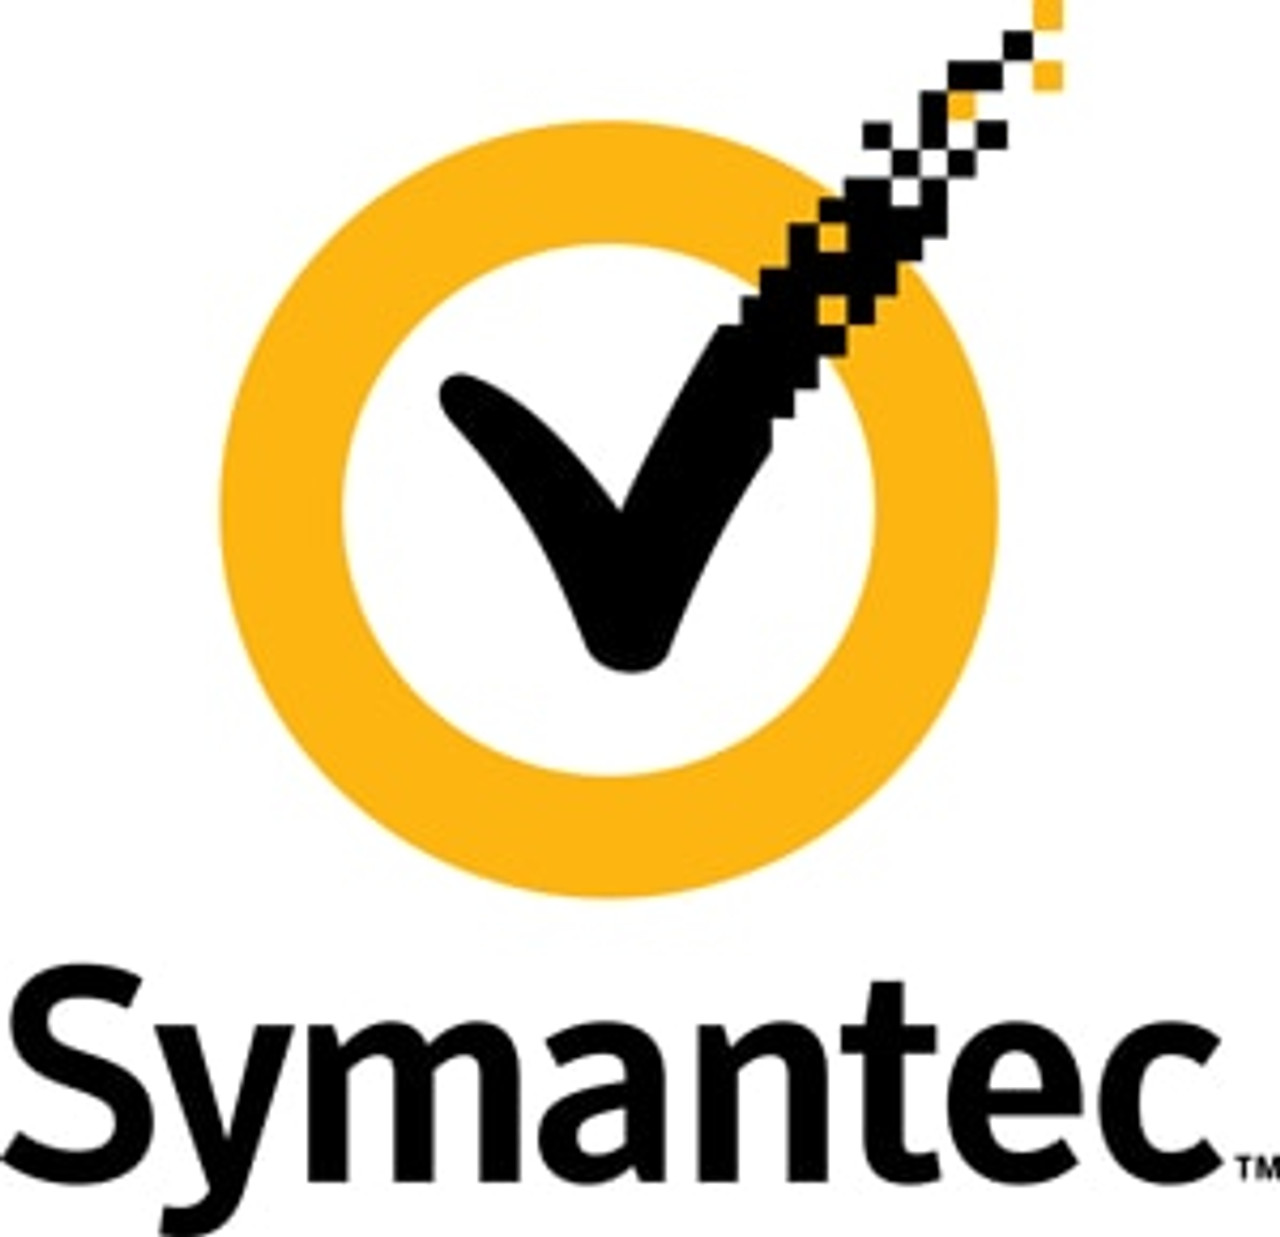 Symantec Industrial Protection Service Standard (SIPSS), Initial Subscription License with Support, Per ICSP Appliance 1 YR